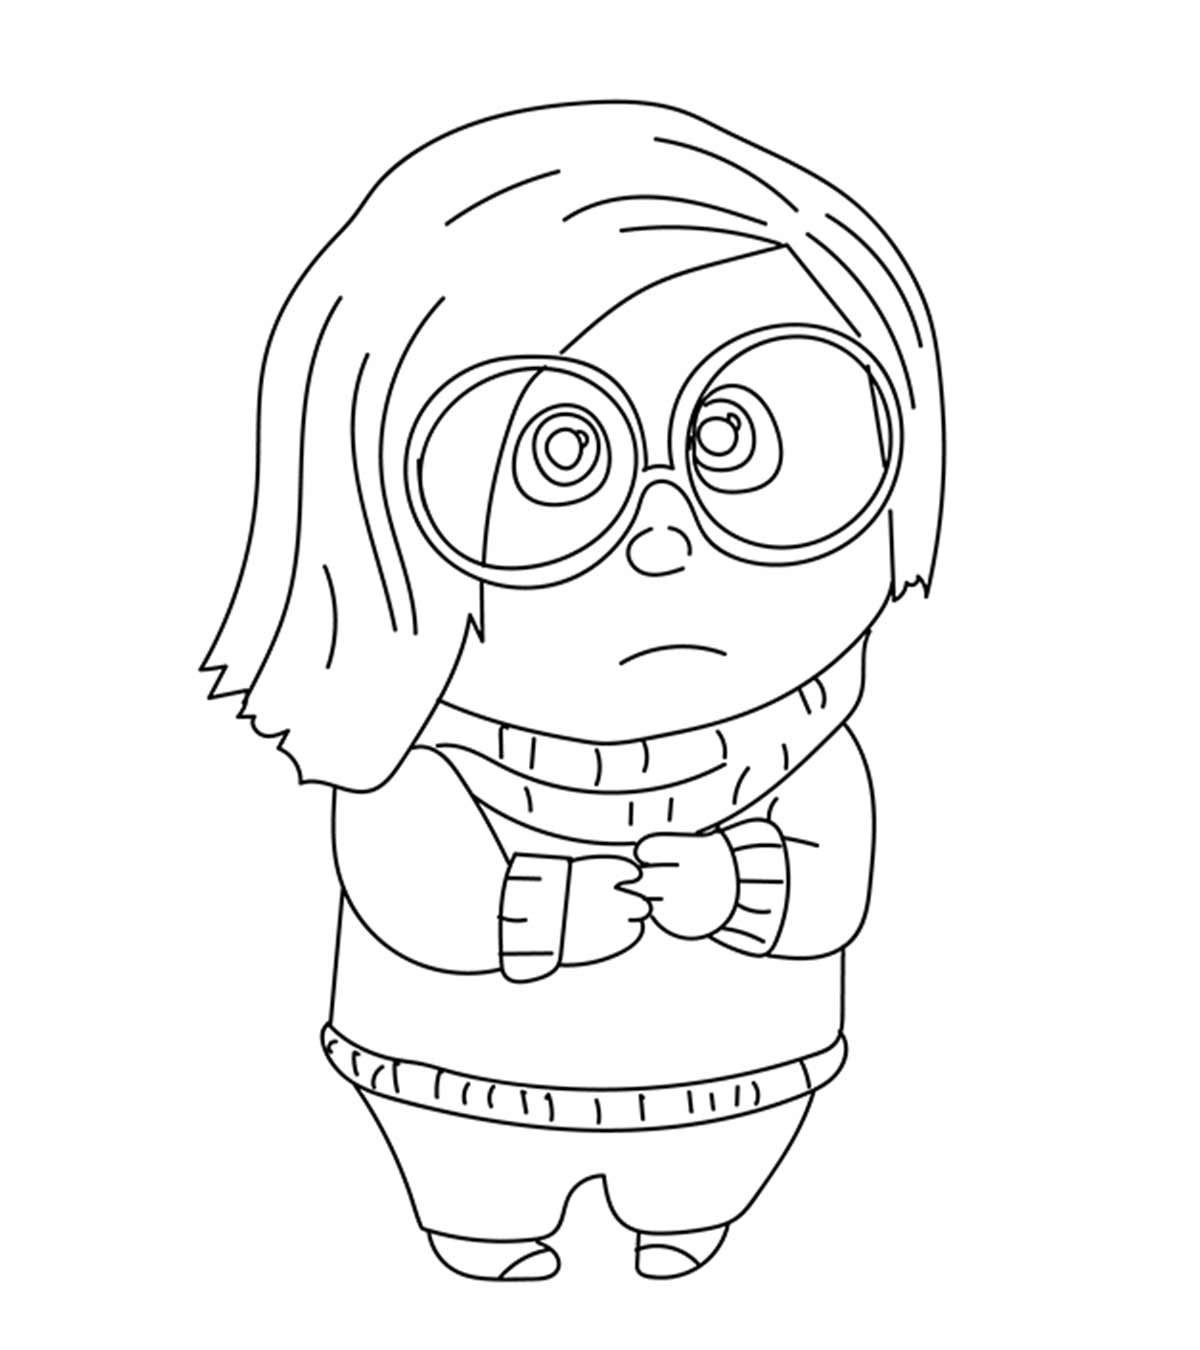 10 Adorable Inside Out Coloring Pages For Your Little One